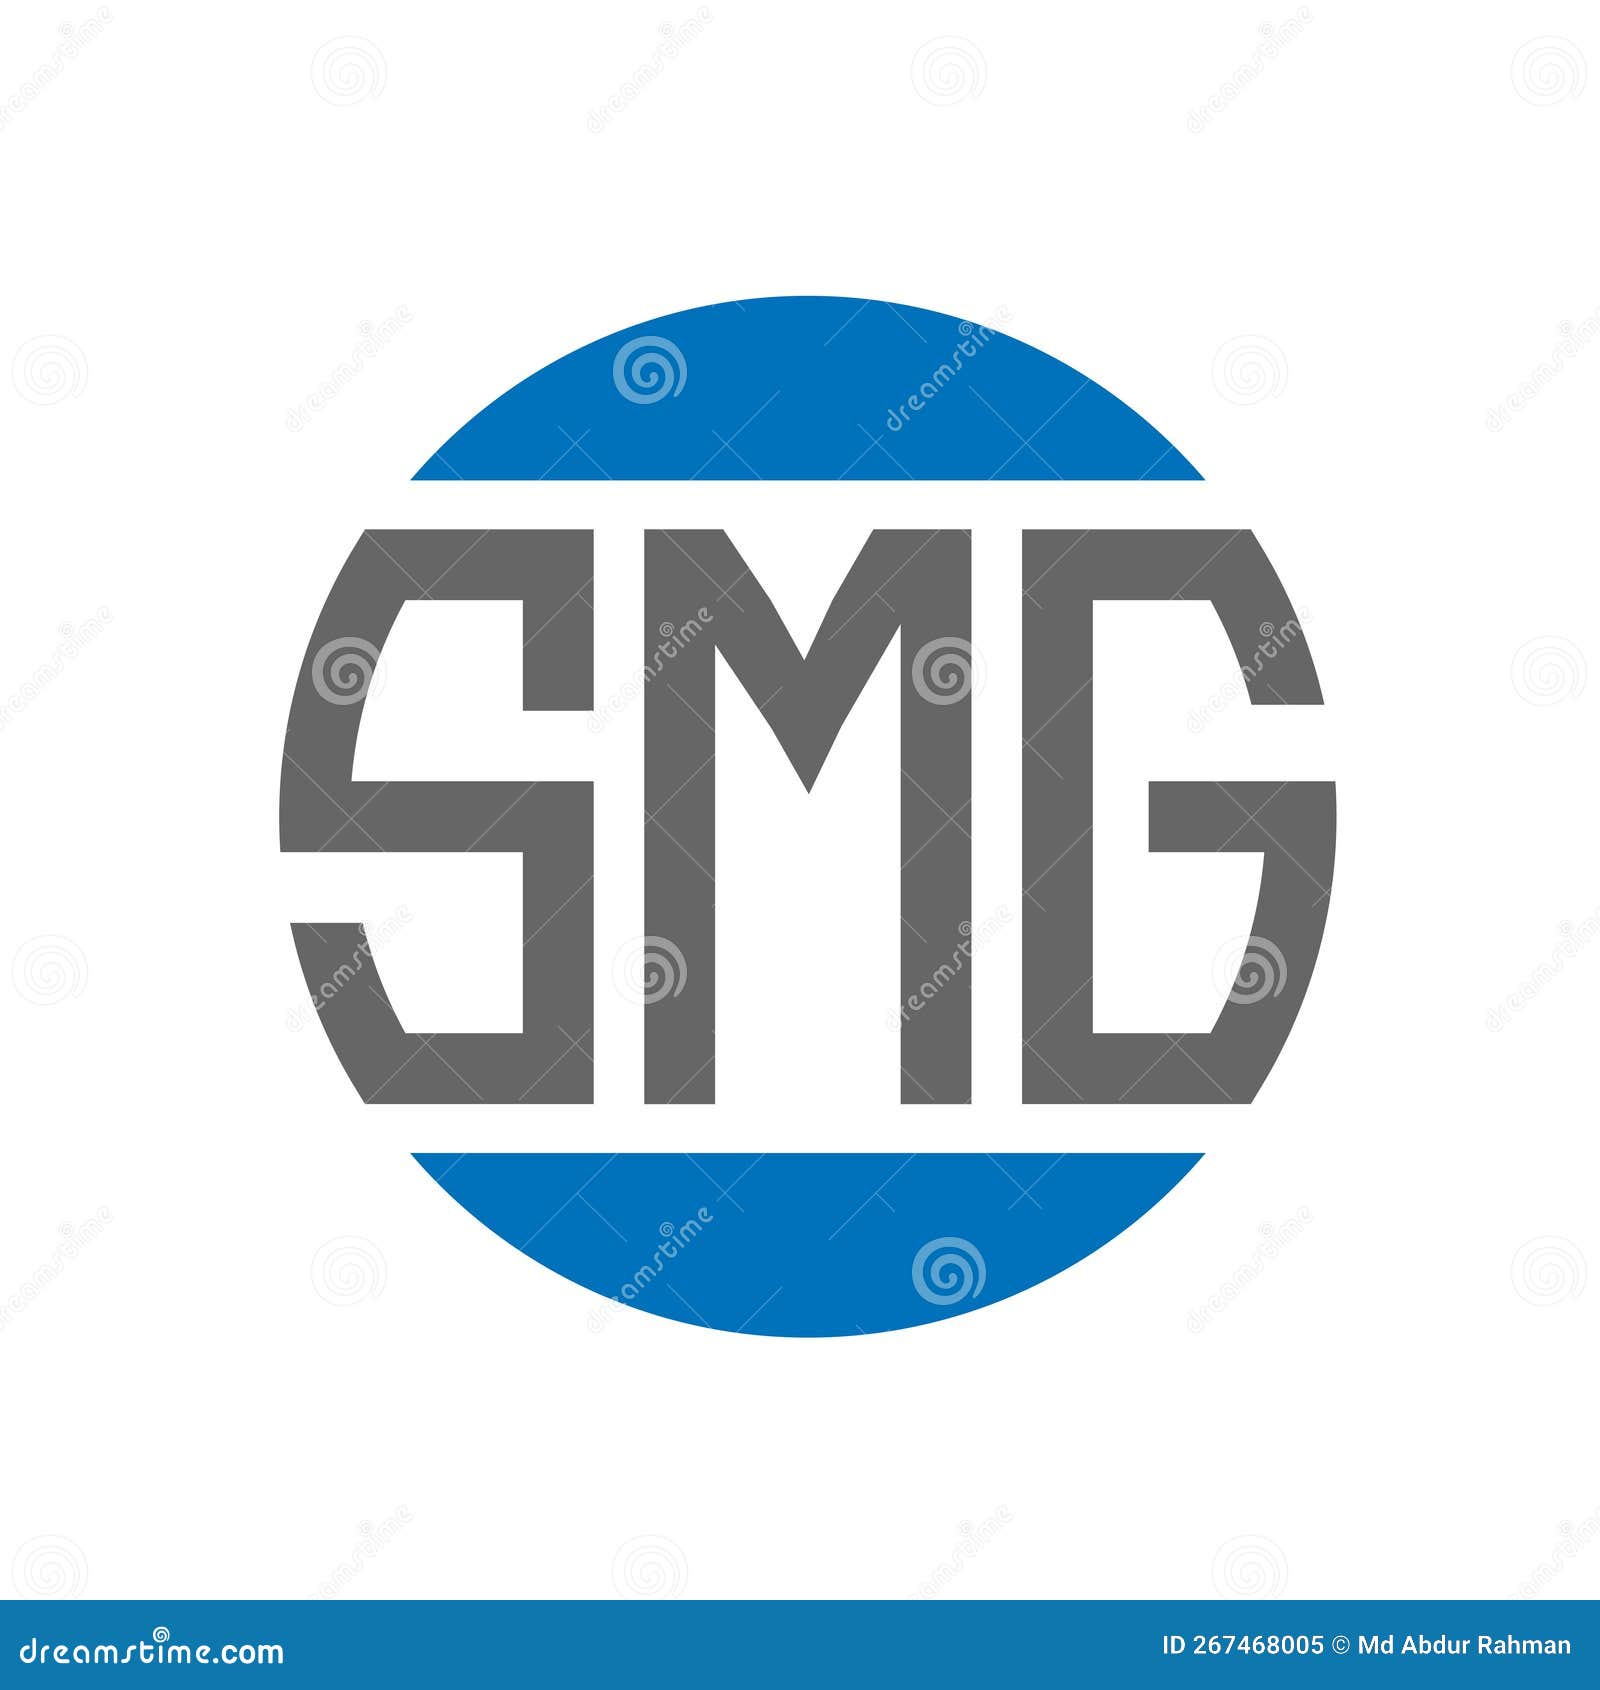 smg letter logo  on white background. smg creative initials circle logo concept. smg letter 